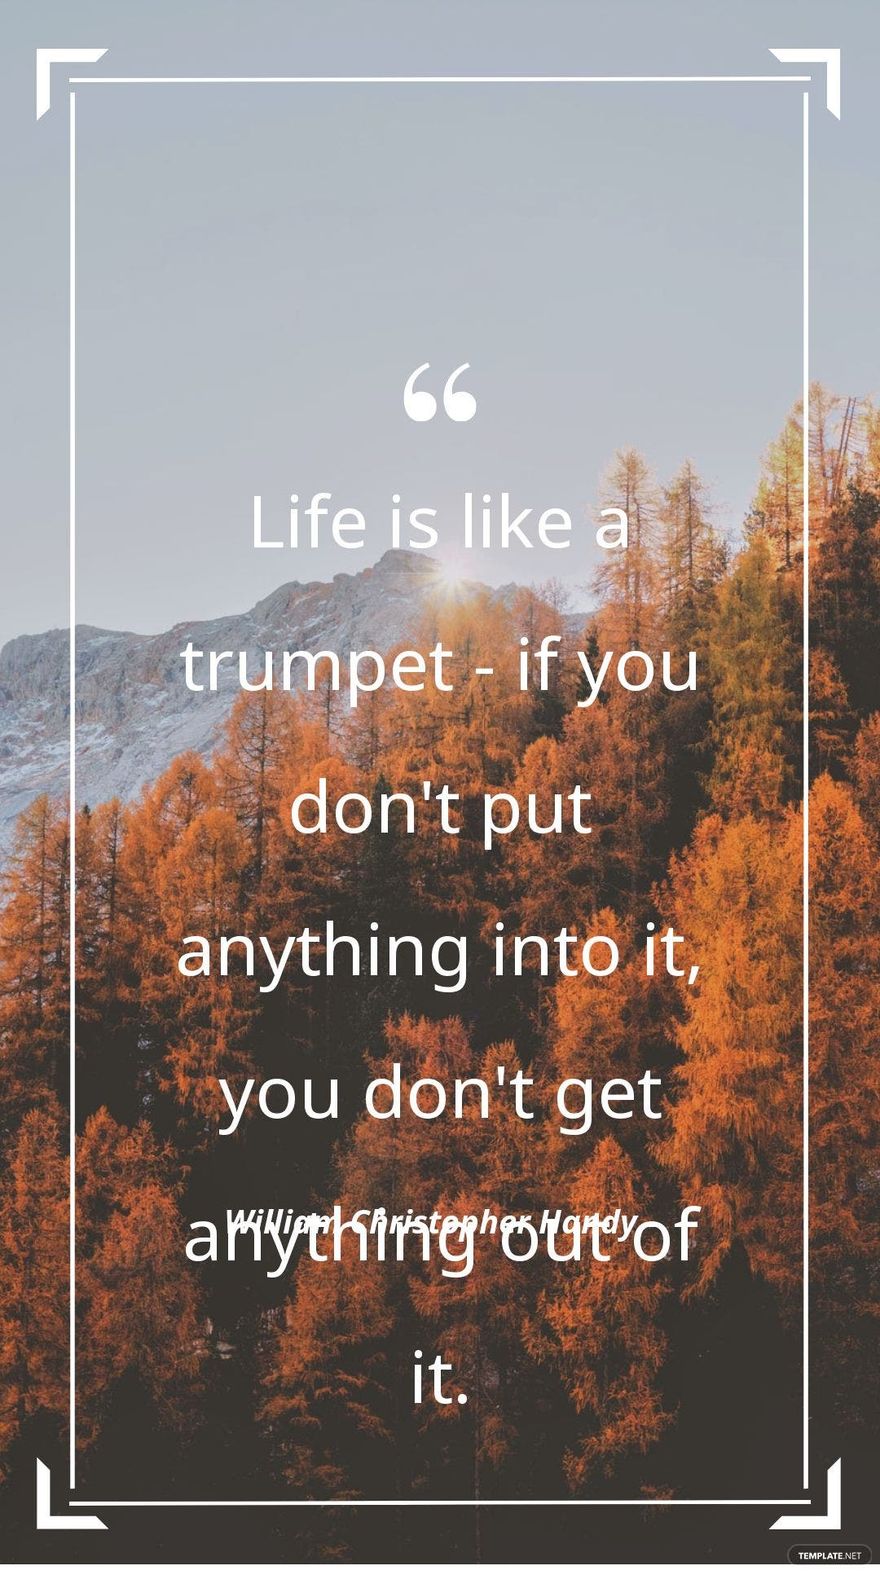 William Christopher Handy - Life is like a trumpet - if you don't put anything into it, you don't get anything out of it.